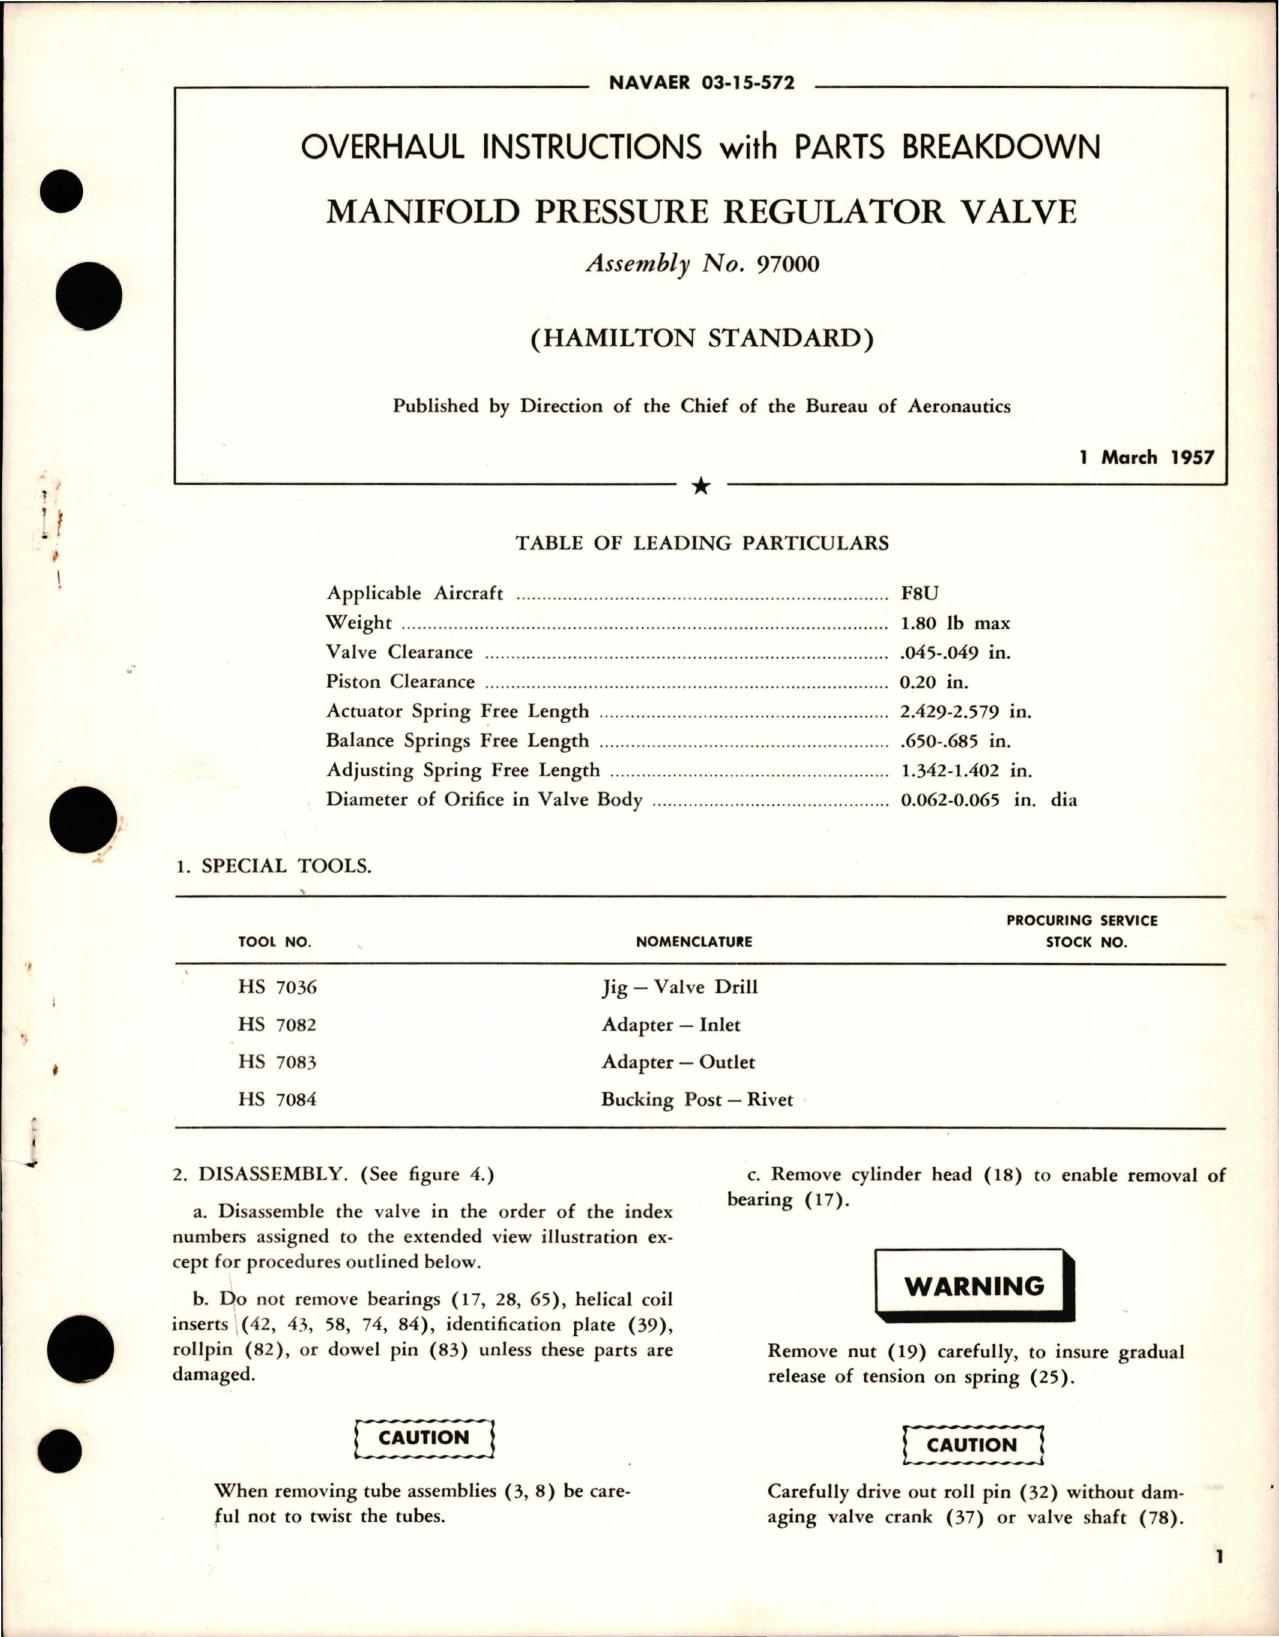 Sample page 1 from AirCorps Library document: Overhaul Instructions with Parts for Manifold Pressure Regulator Valve - Assembly No. 97000 